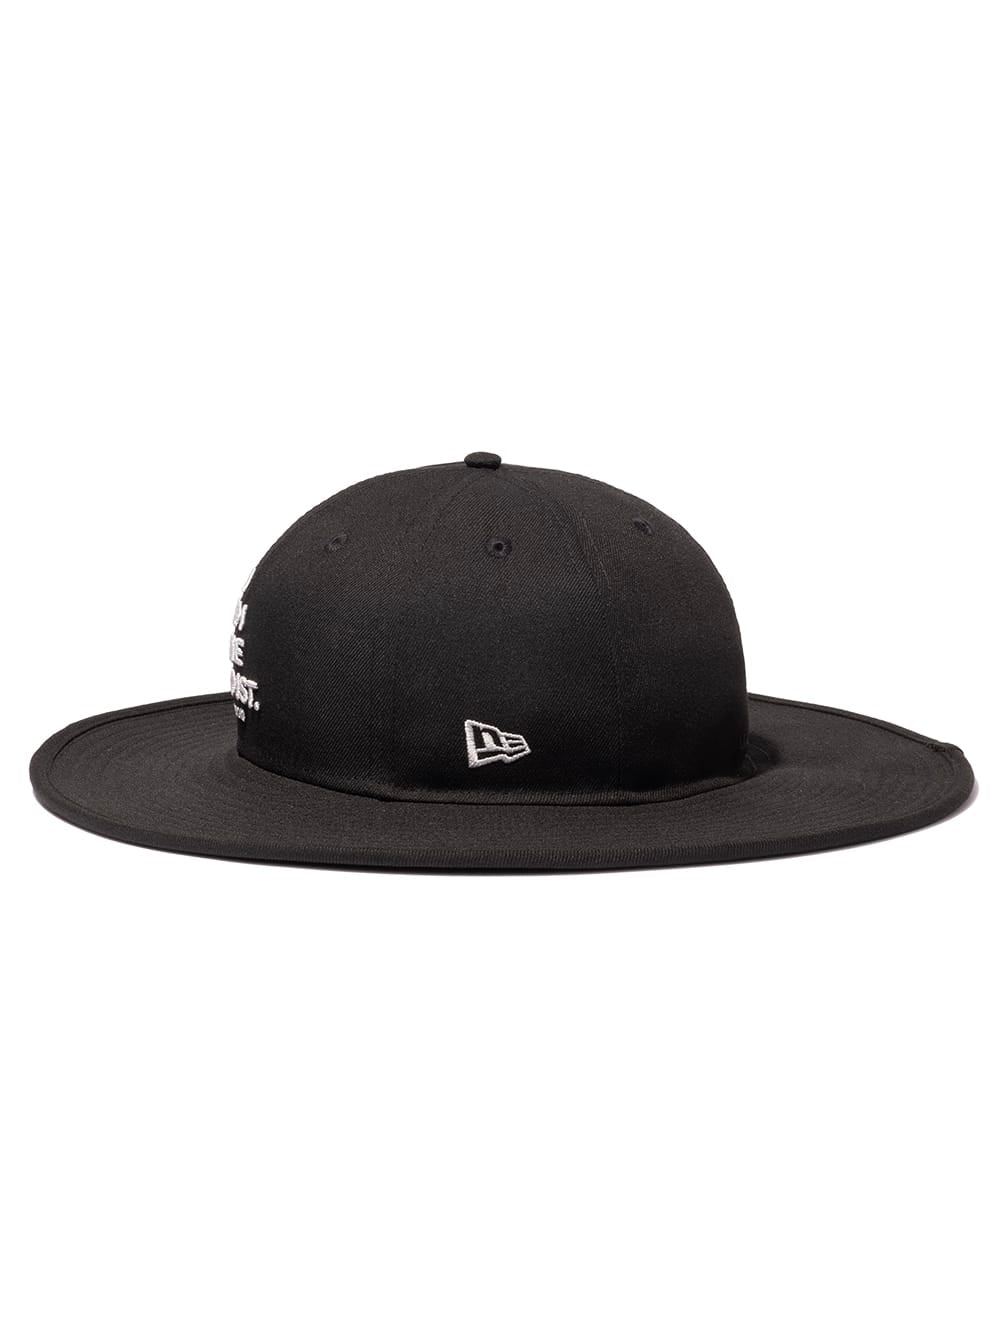 snwa.0010 Fitted Long Brim Hat.(I AM THE SOLOIST.)｜ NEWERA 